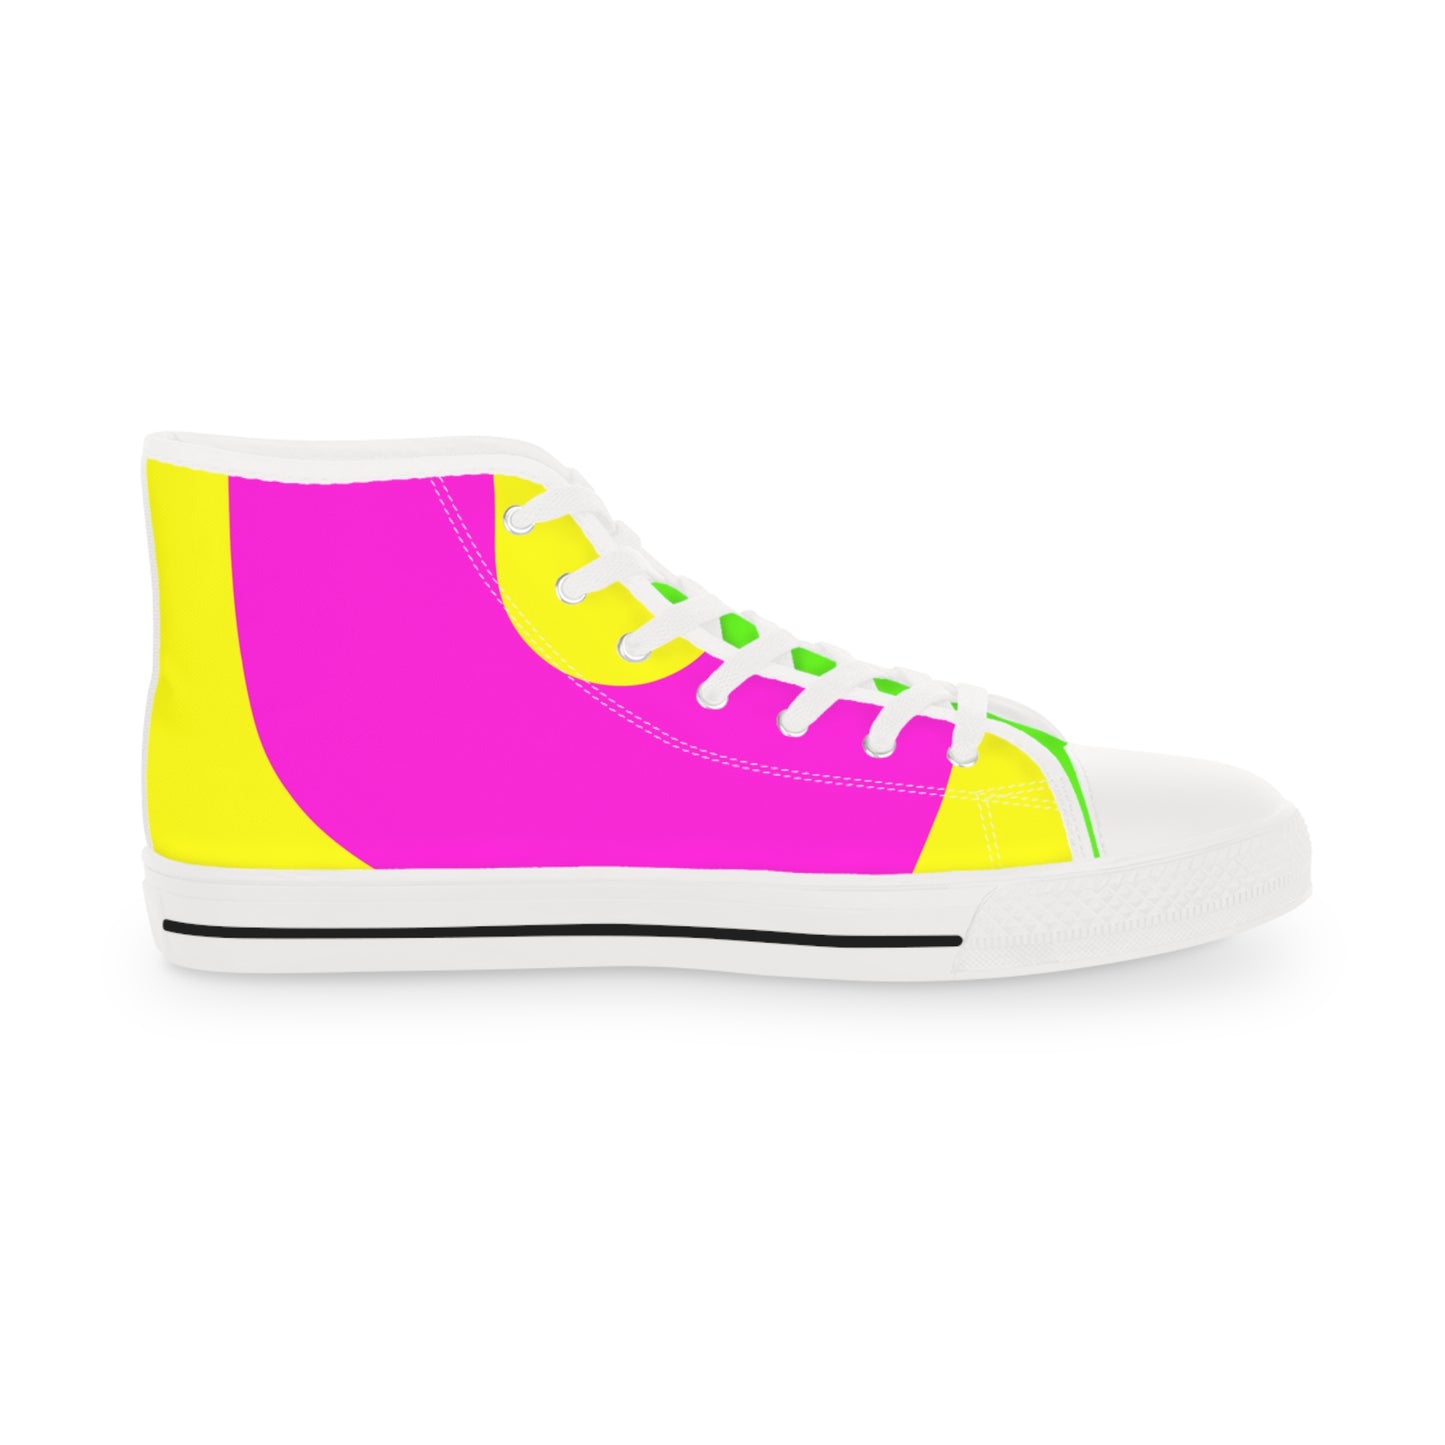 Limited Edition High Top Sneakers - 9